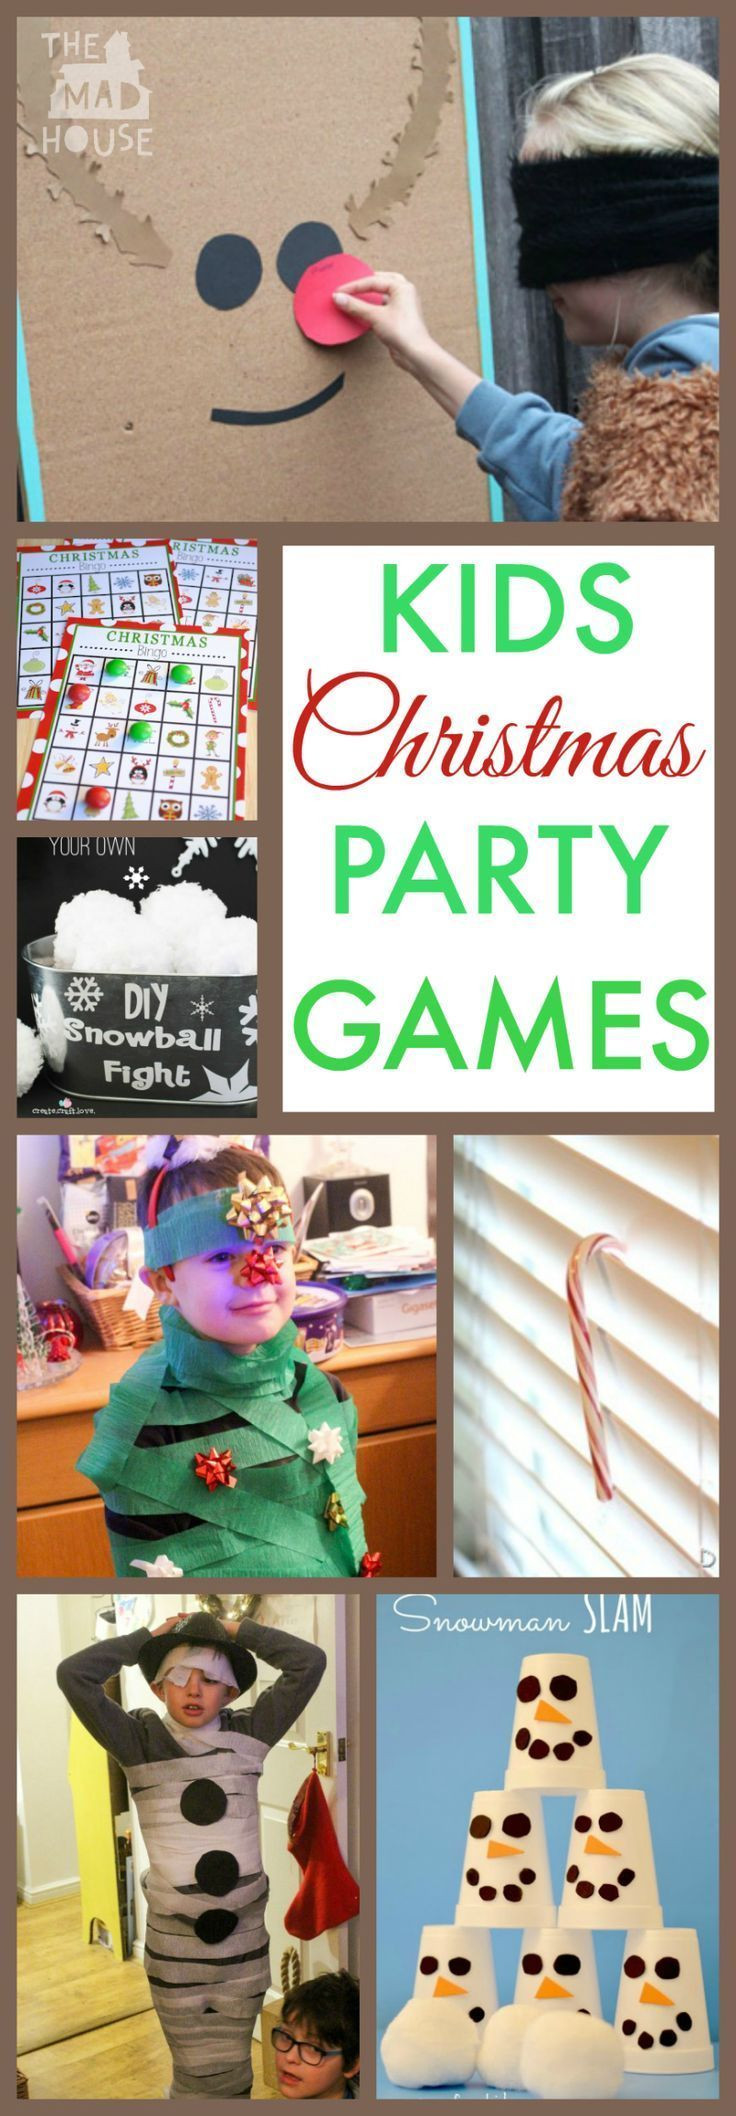 Christmas Party Games Ideas For Large Groups
 Christmas Party Games